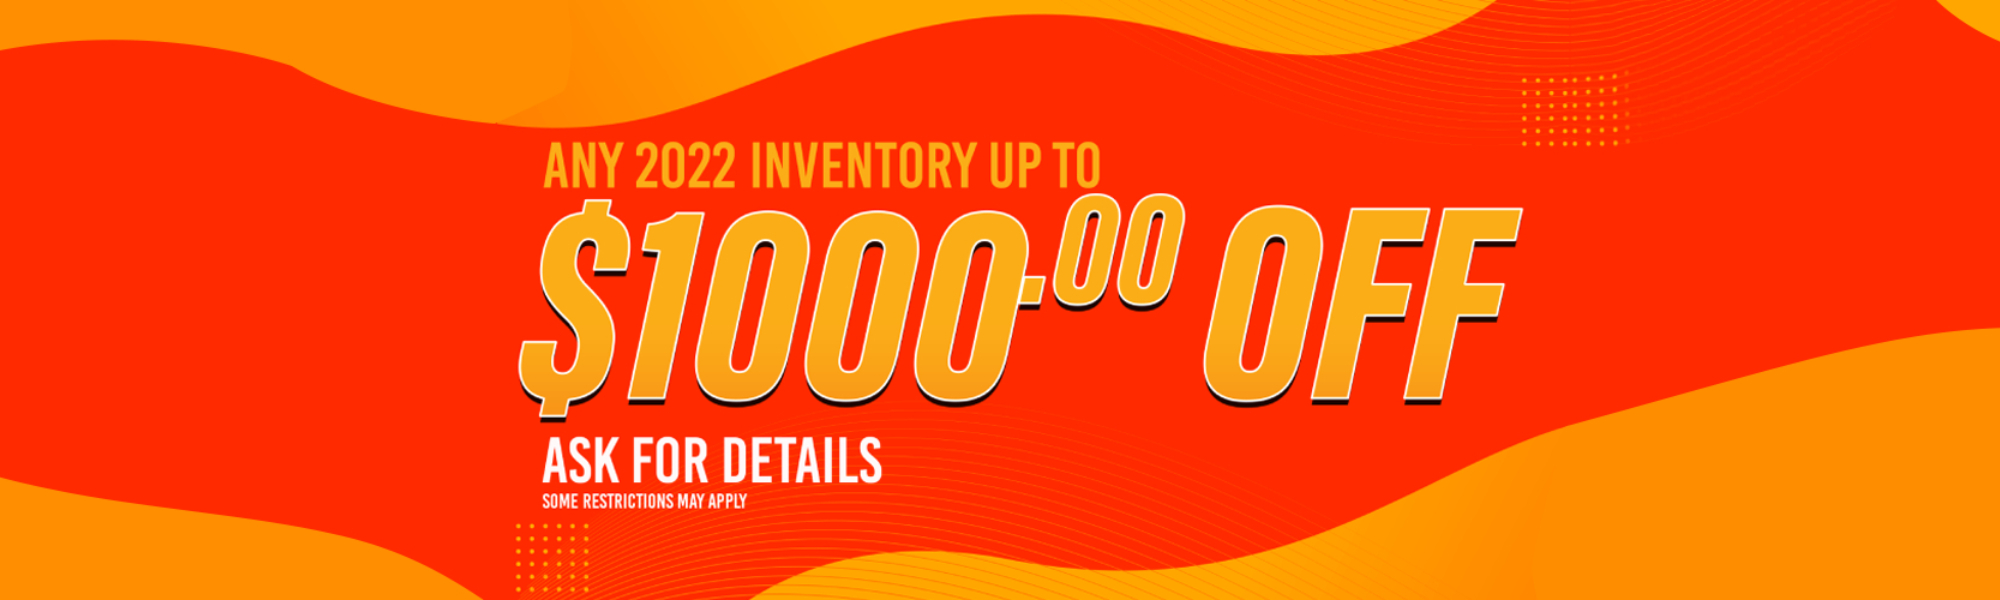 Any 2022 Inventory up to $1000 off